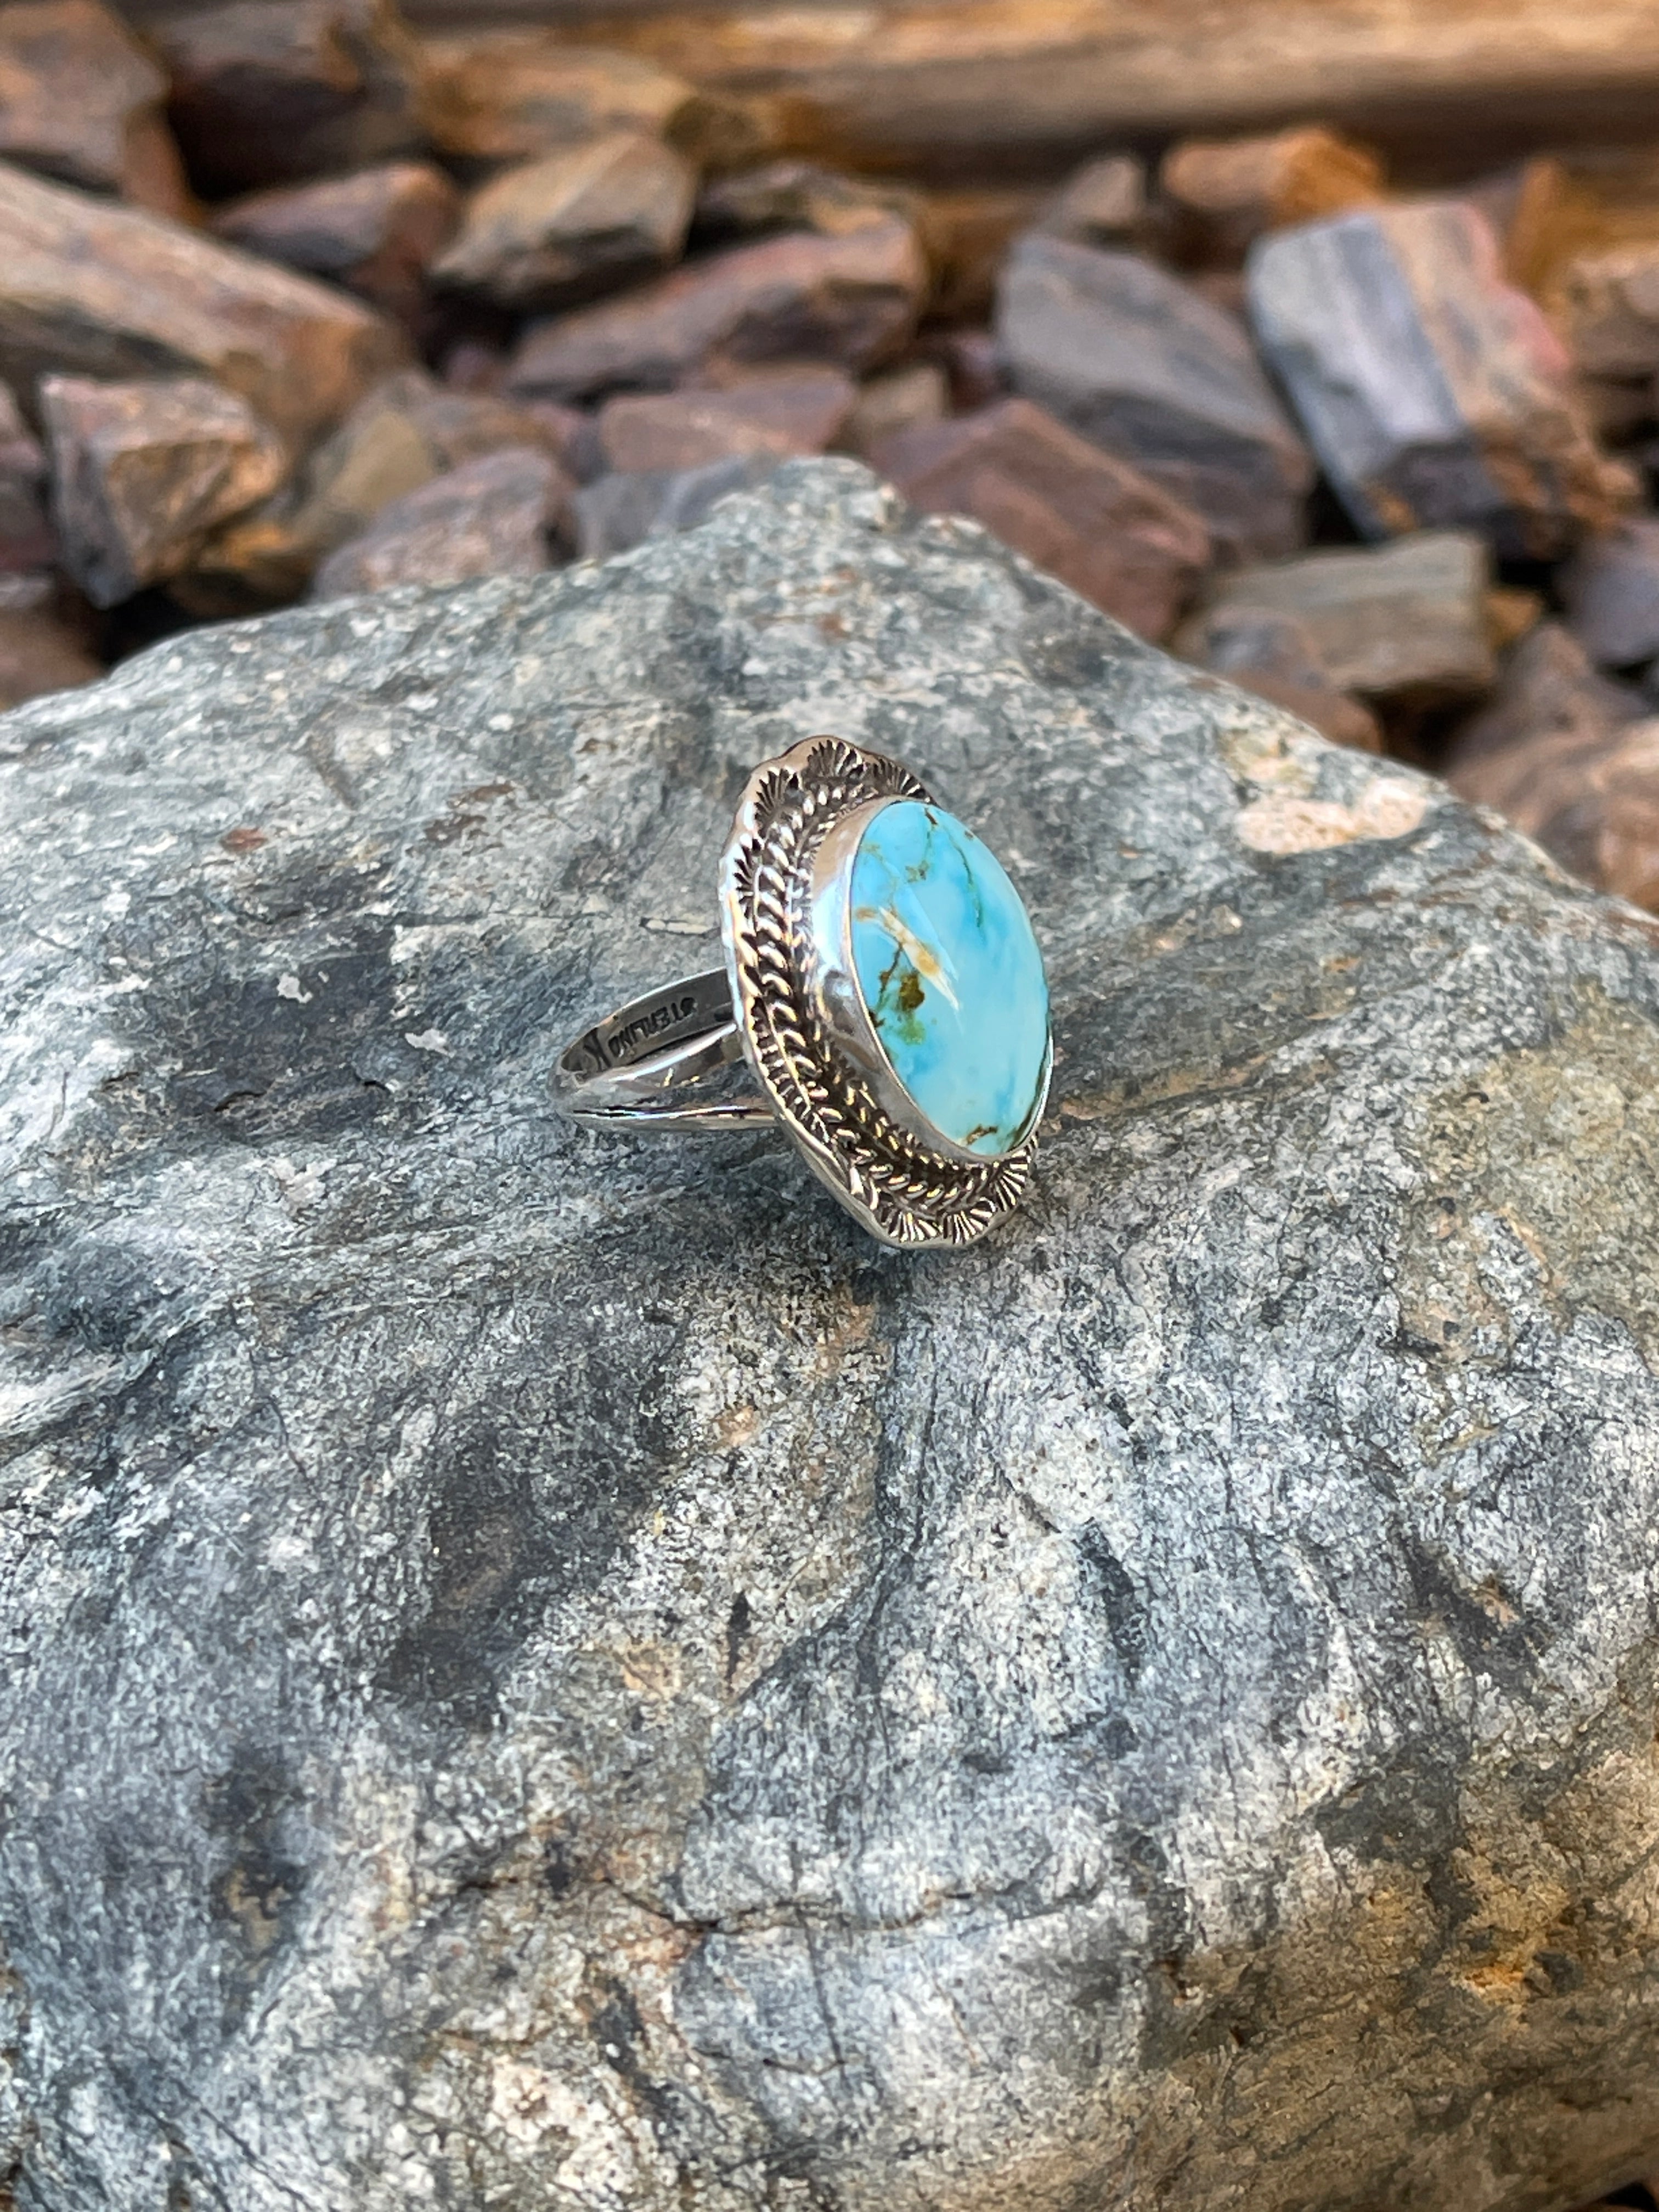 Handmade Solid Sterling Silver Turquoise Mountain Ring with Stamp Trim - Size 7